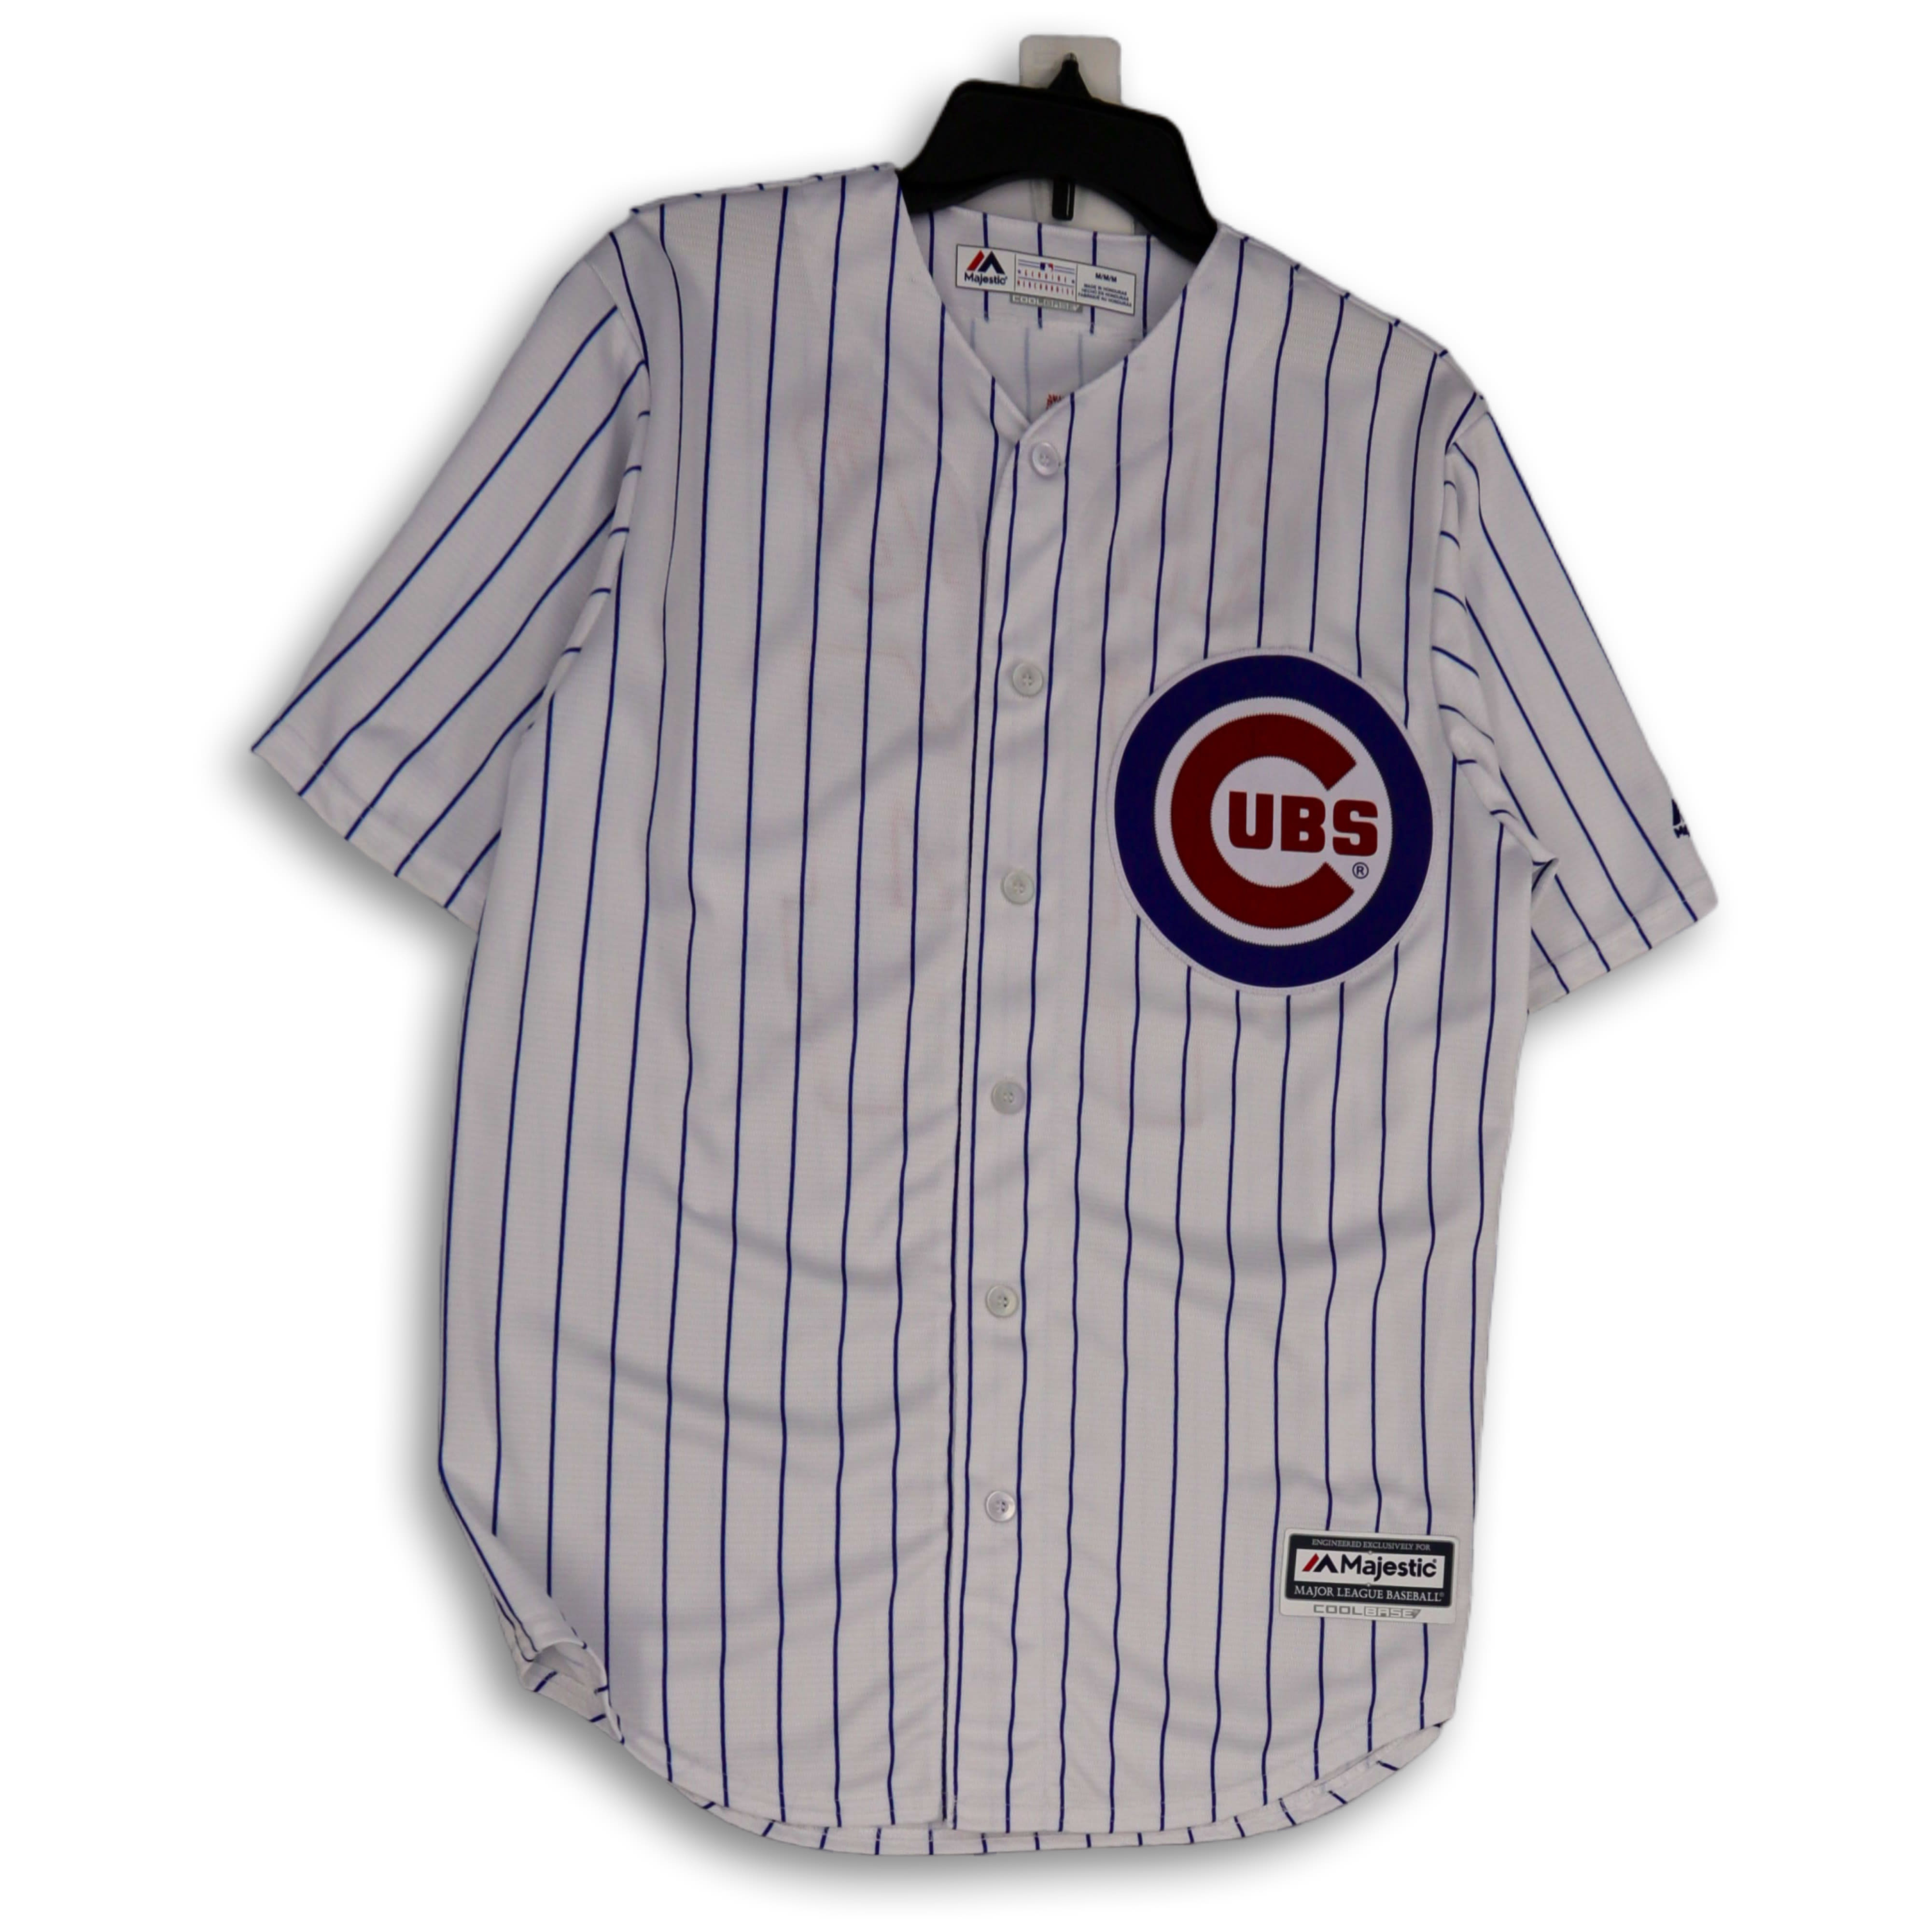 Anthony Rizzo Chicago Cubs Gray men's Majestic jersey